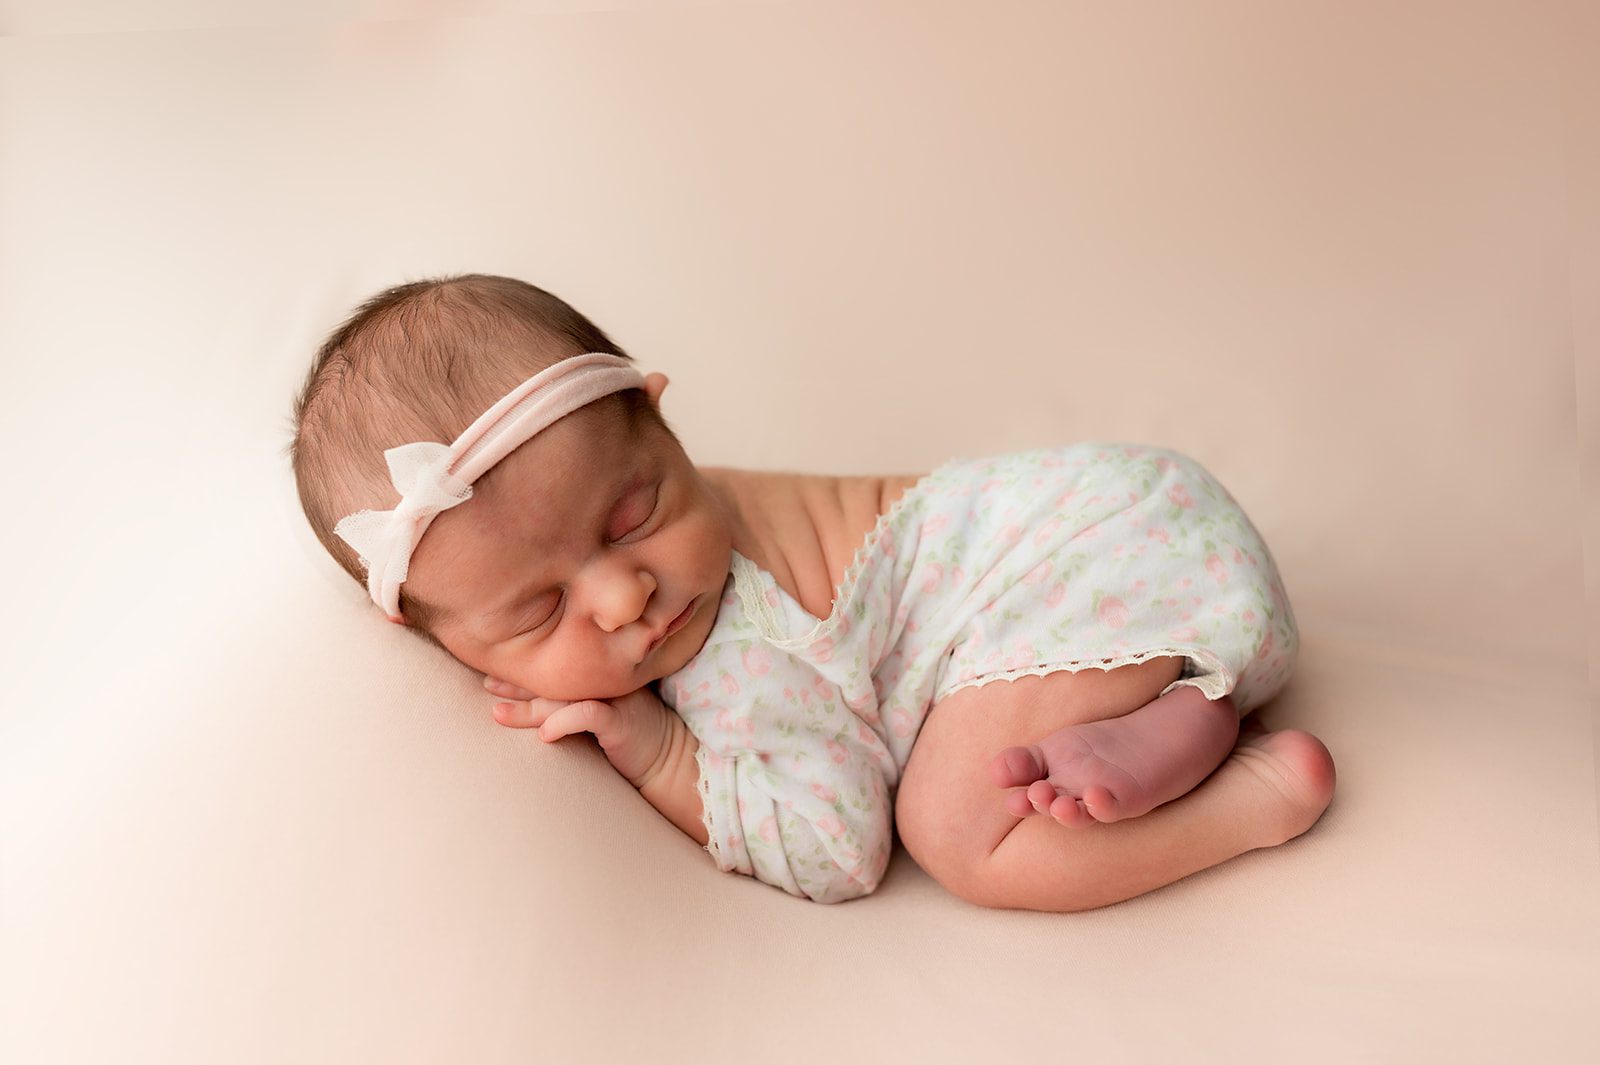 Baby girl in loveland photography studio completes family of 5